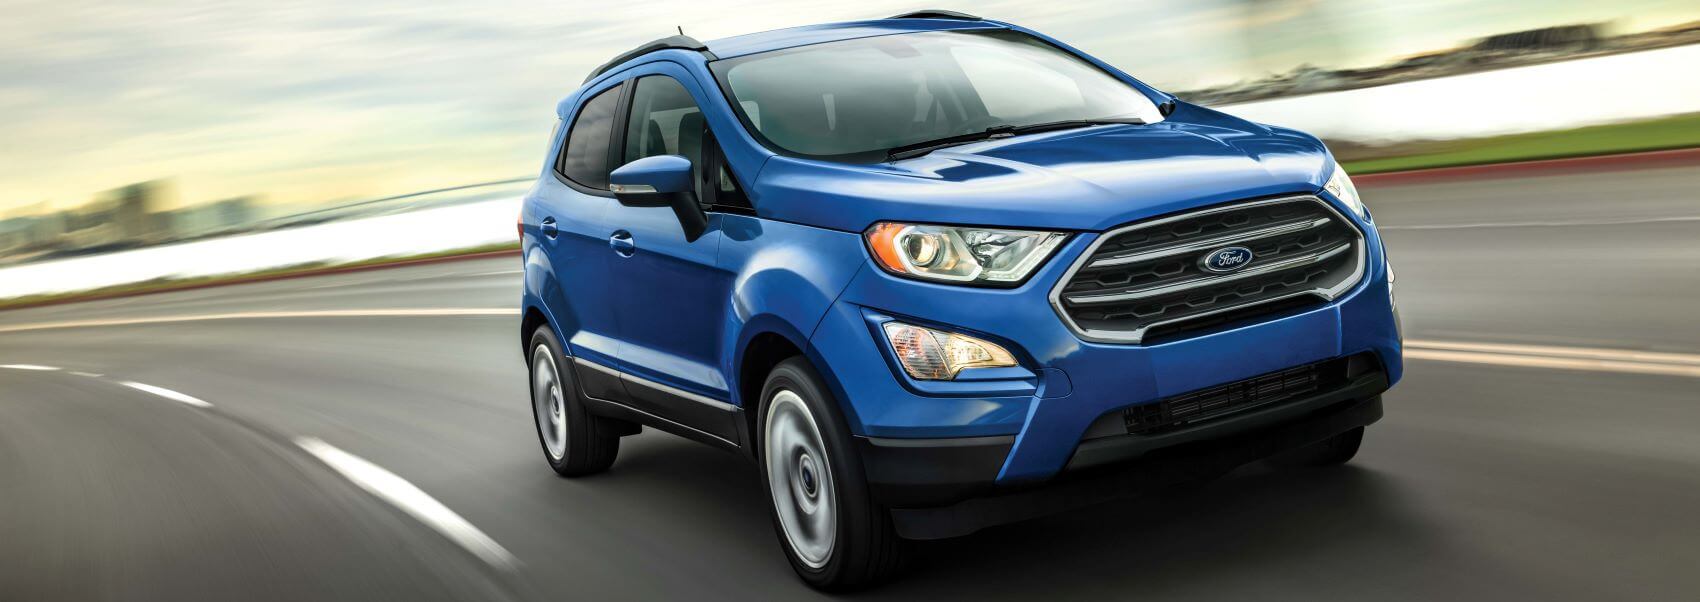 Test Drive The 2021 Ford Ecosport Today!